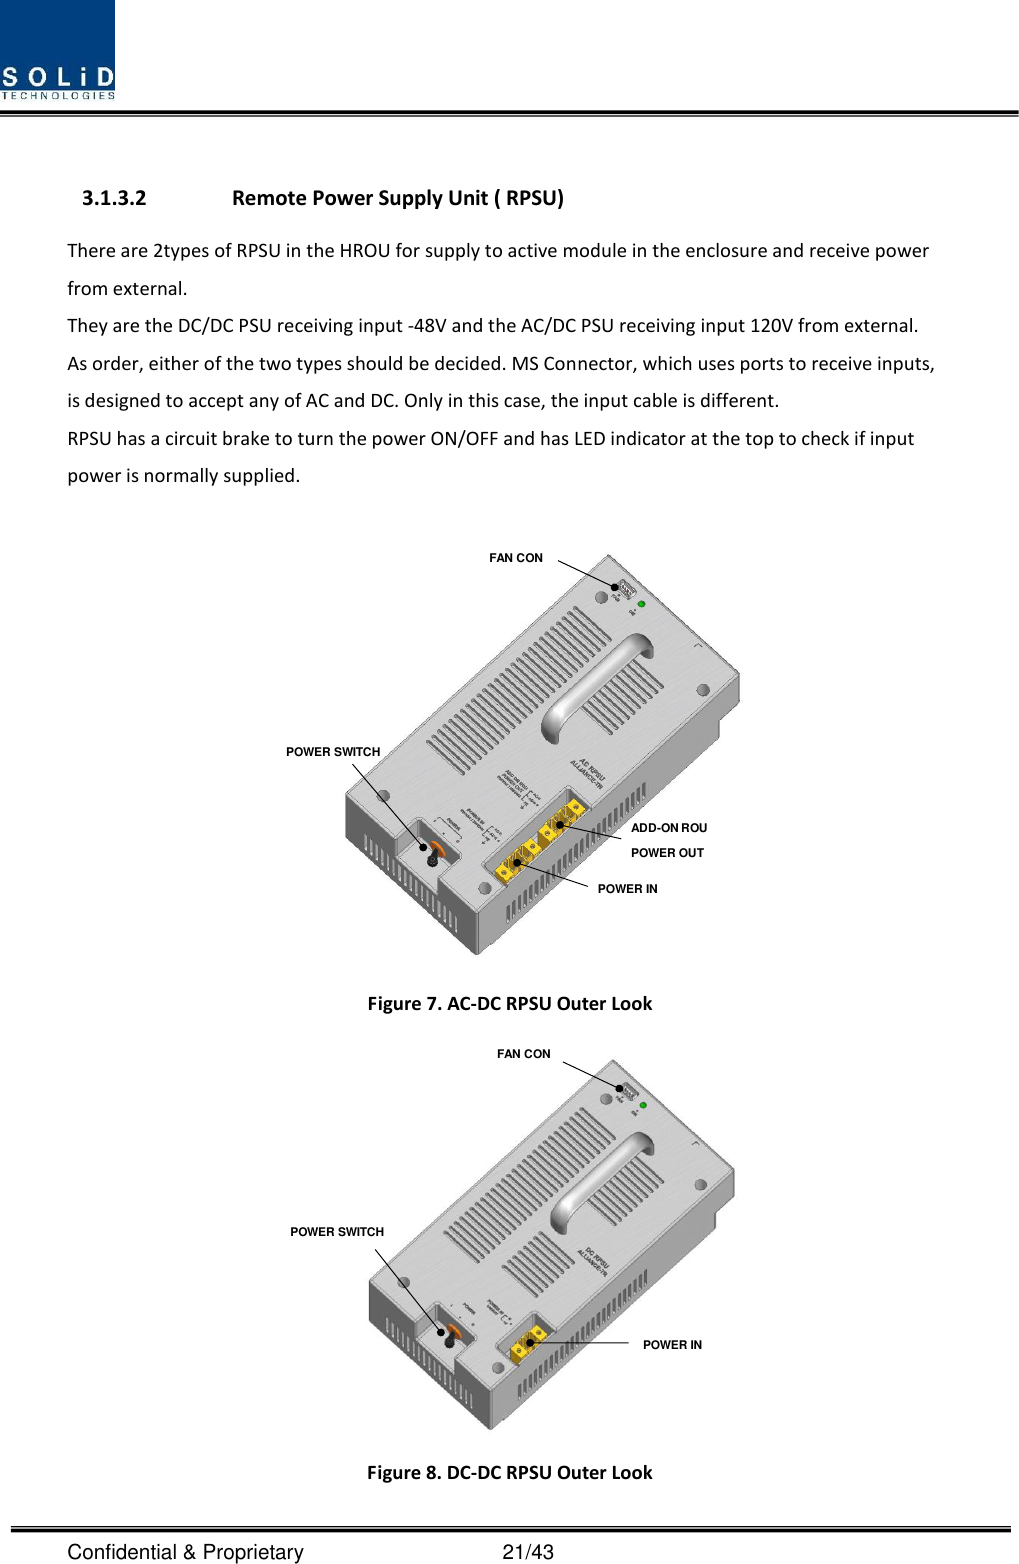  Confidential &amp; Proprietary                                      21/43  3.1.3.2 Remote Power Supply Unit ( RPSU) There are 2types of RPSU in the HROU for supply to active module in the enclosure and receive power from external.   They are the DC/DC PSU receiving input -48V and the AC/DC PSU receiving input 120V from external. As order, either of the two types should be decided. MS Connector, which uses ports to receive inputs, is designed to accept any of AC and DC. Only in this case, the input cable is different. RPSU has a circuit brake to turn the power ON/OFF and has LED indicator at the top to check if input power is normally supplied.  POWER SWITCHFAN CONPOWER INADD-ON ROU POWER OUT Figure 7. AC-DC RPSU Outer Look POWER INPOWER SWITCHFAN CON Figure 8. DC-DC RPSU Outer Look 